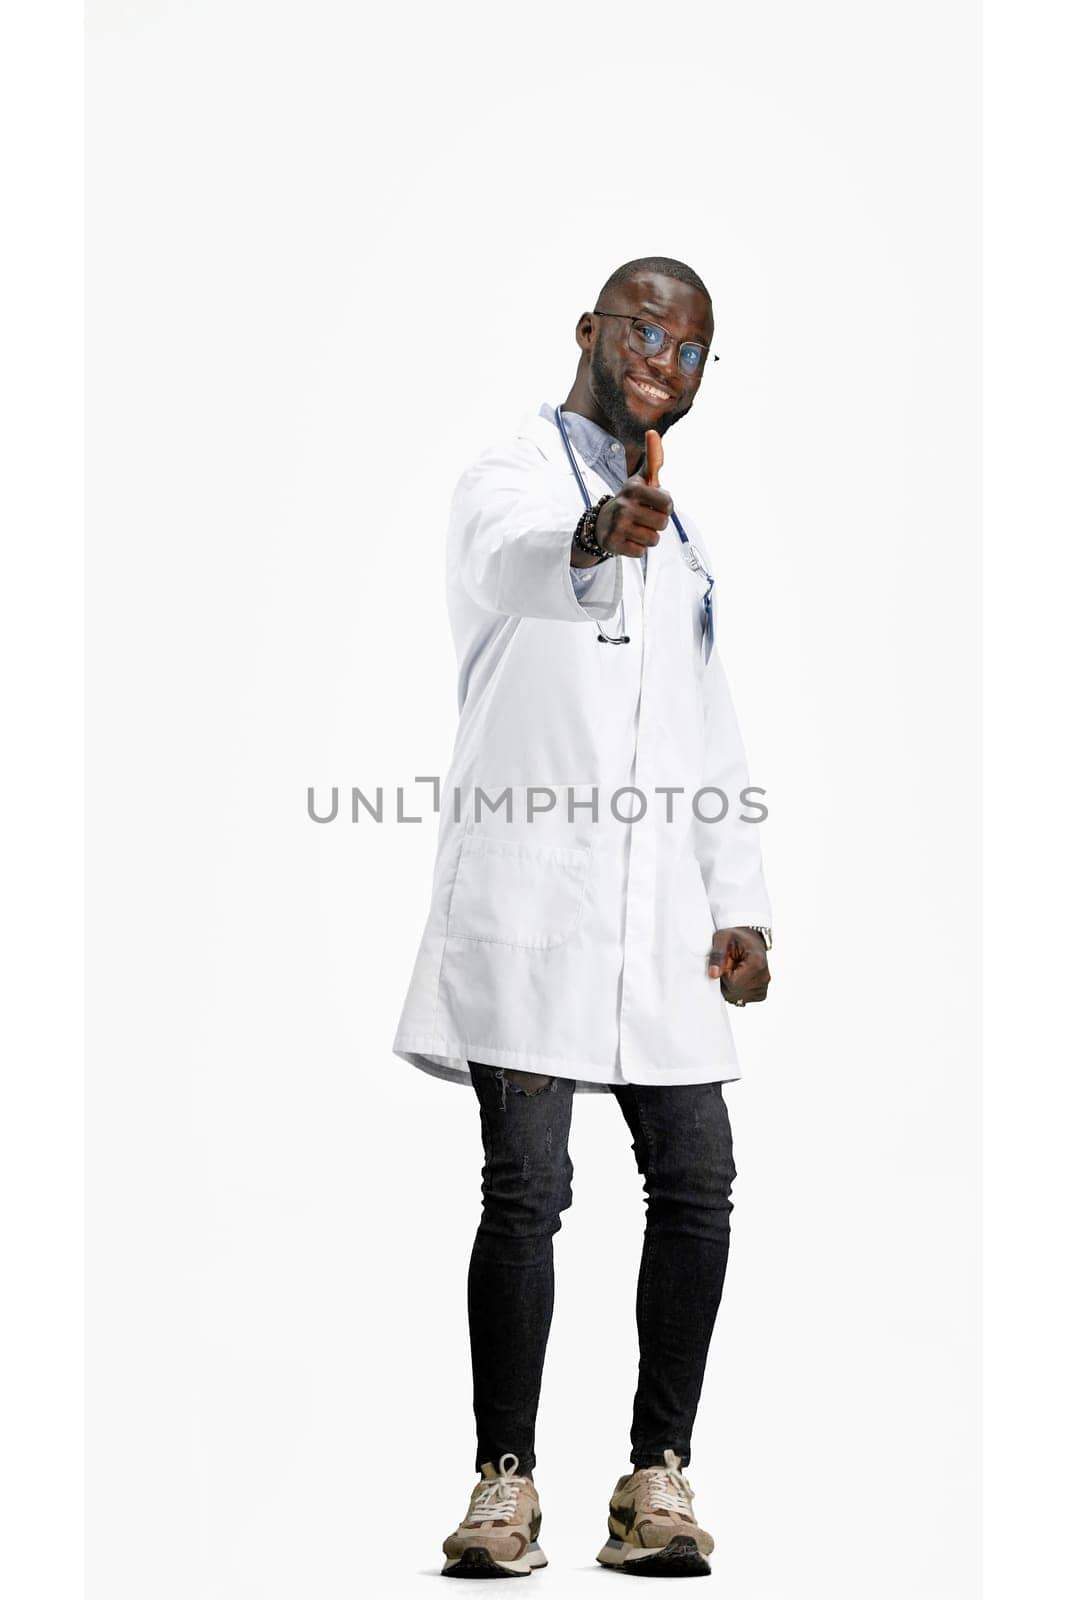 The doctor, in full height, on a white background, shows a thumbs up.